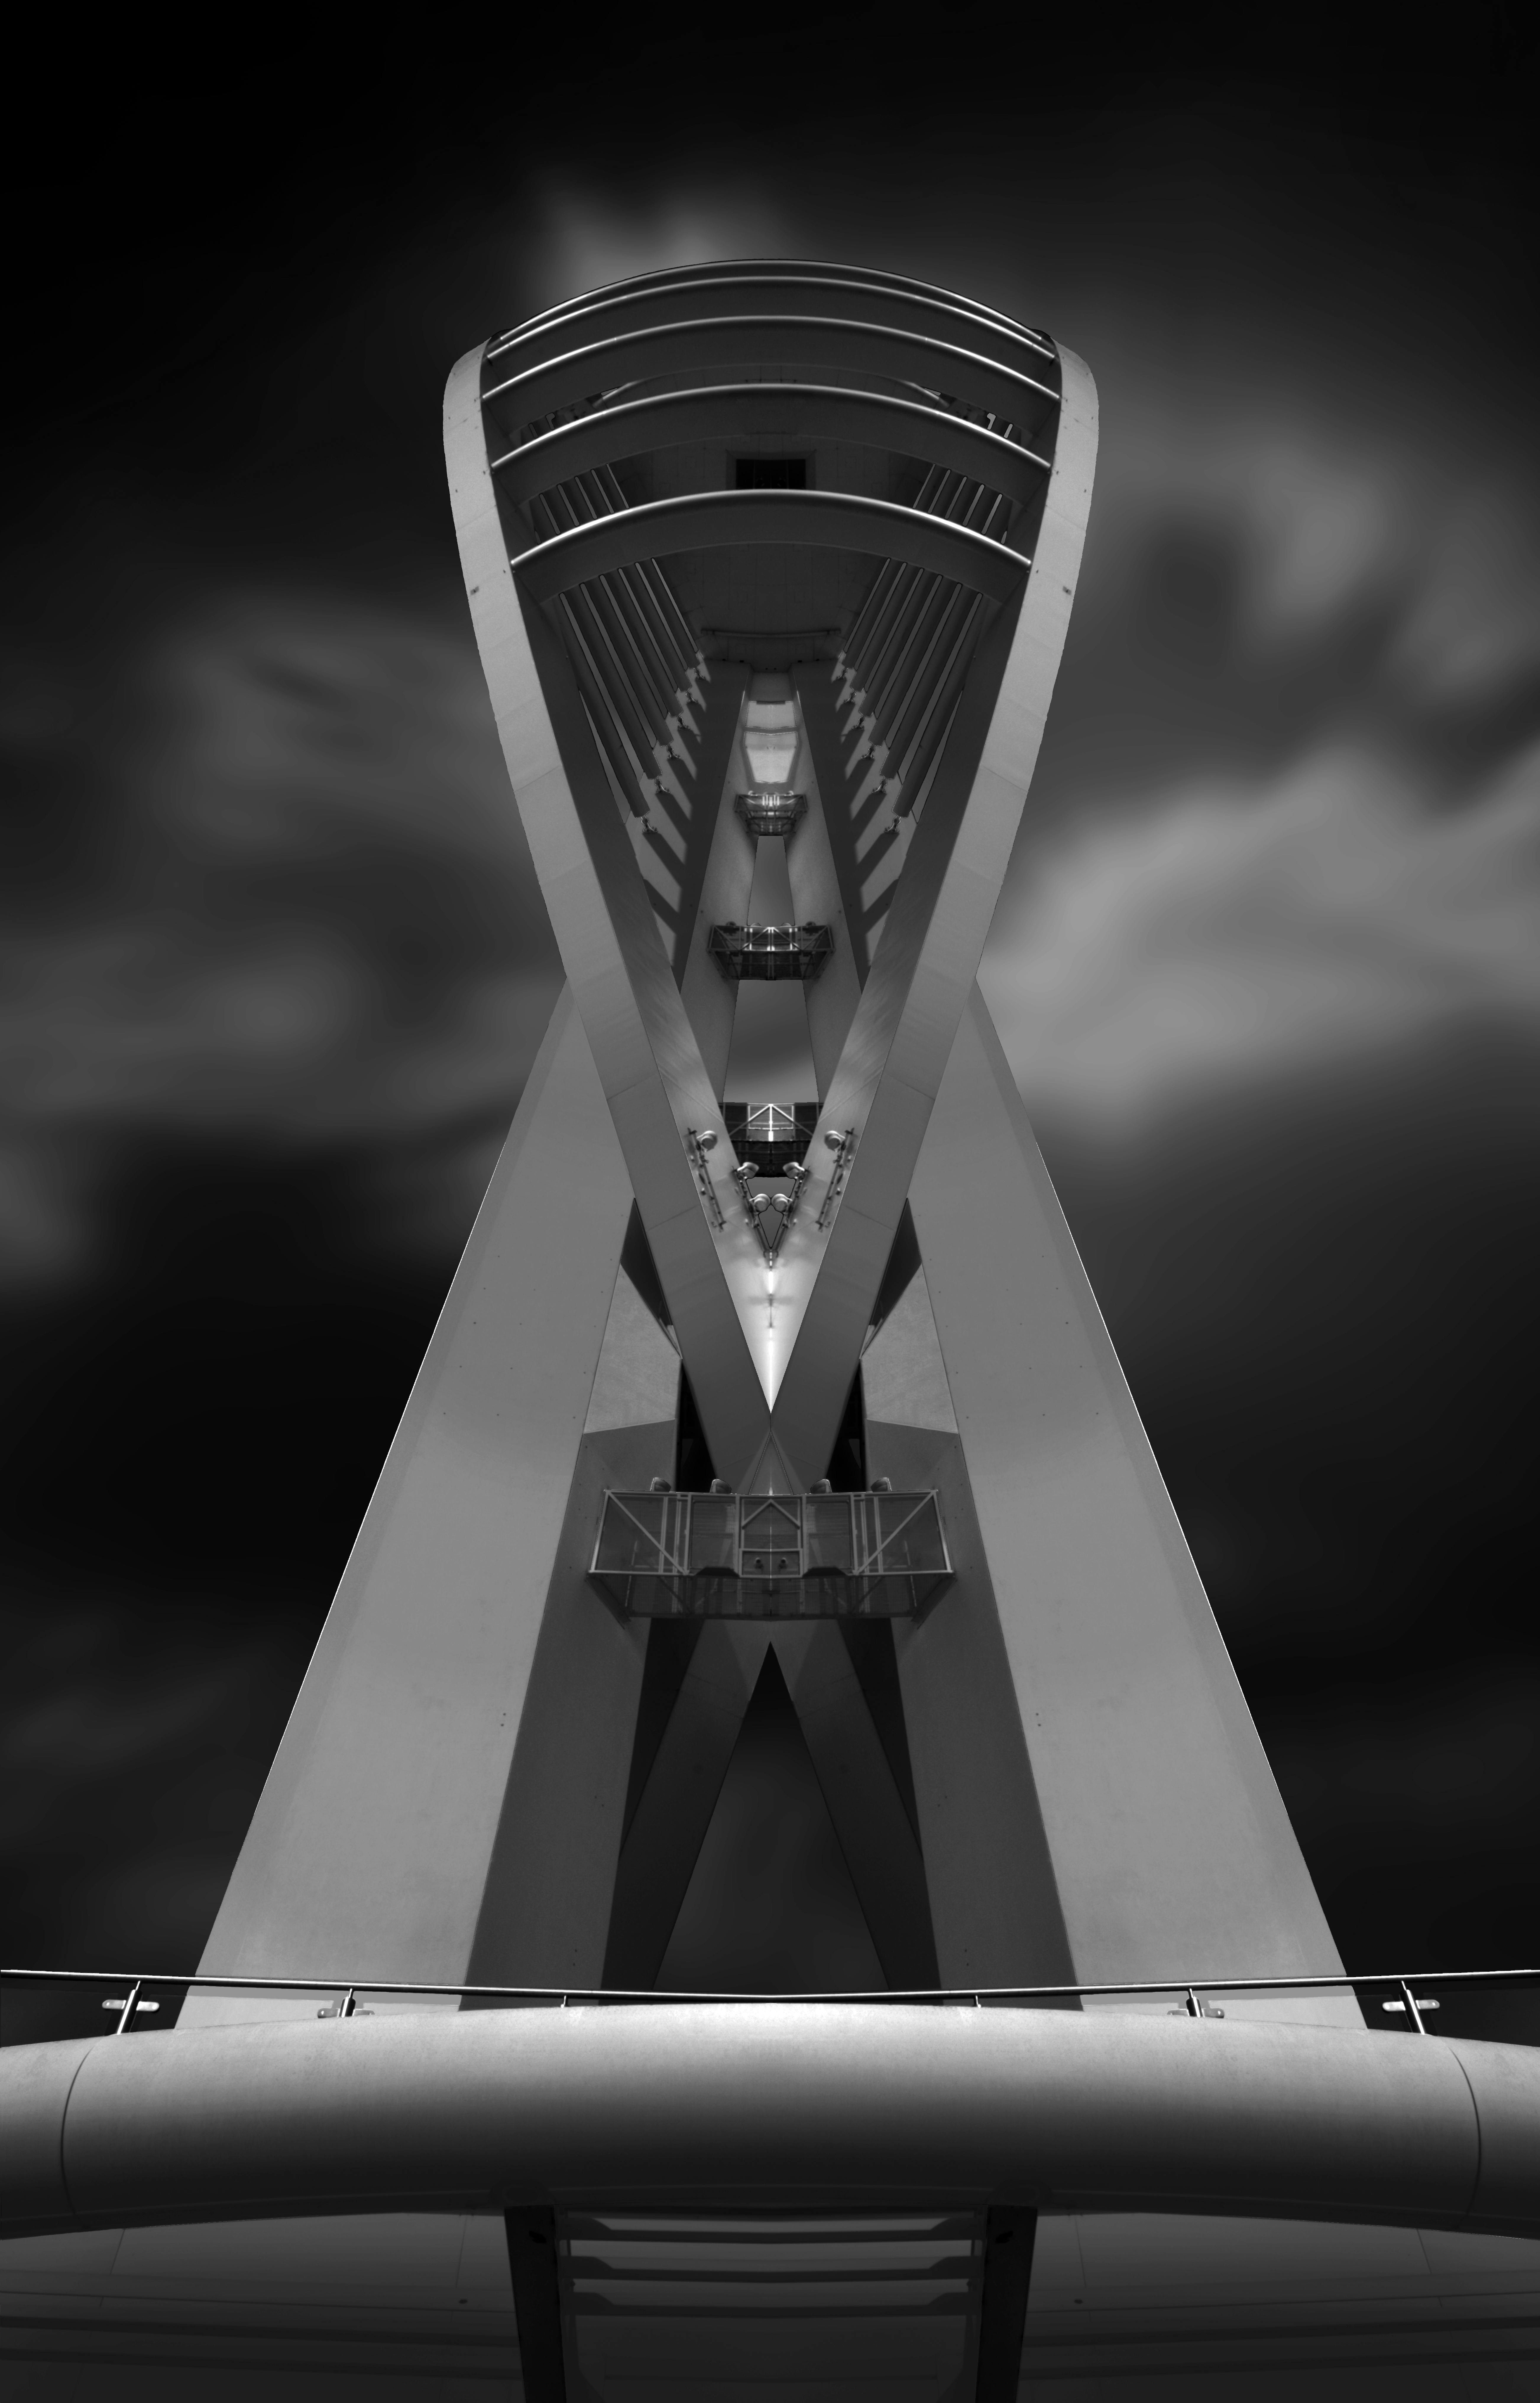 The-Spinnaker-Tower-by-Grant-Dawkins-9.5-Advanced